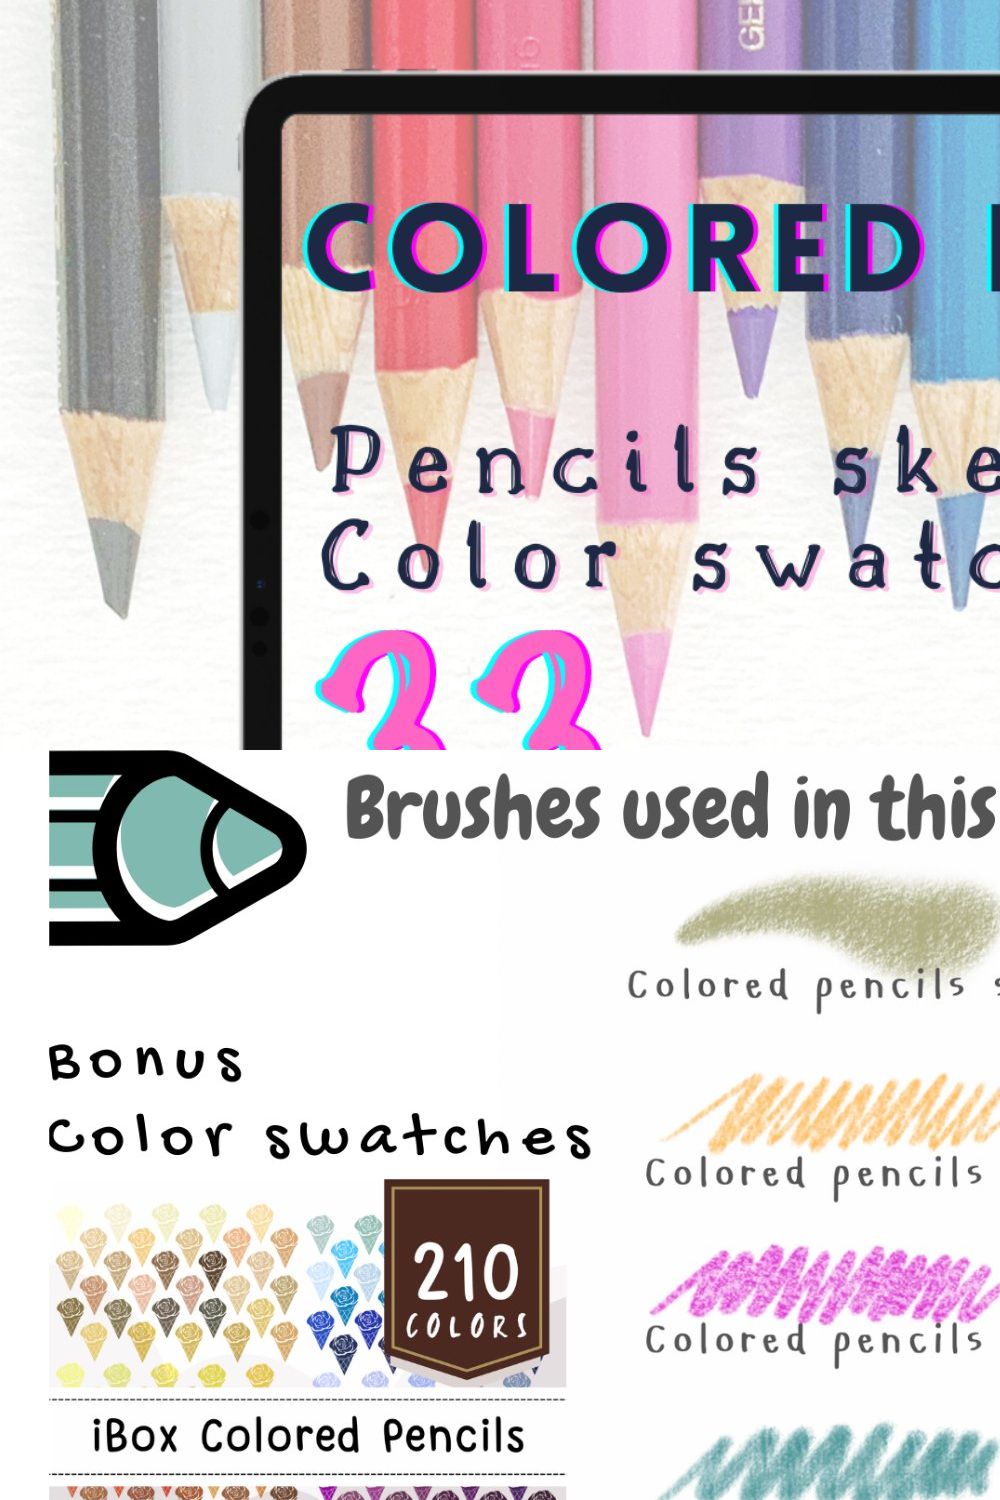 33 Colored pencils procreate brushes pinterest preview image.